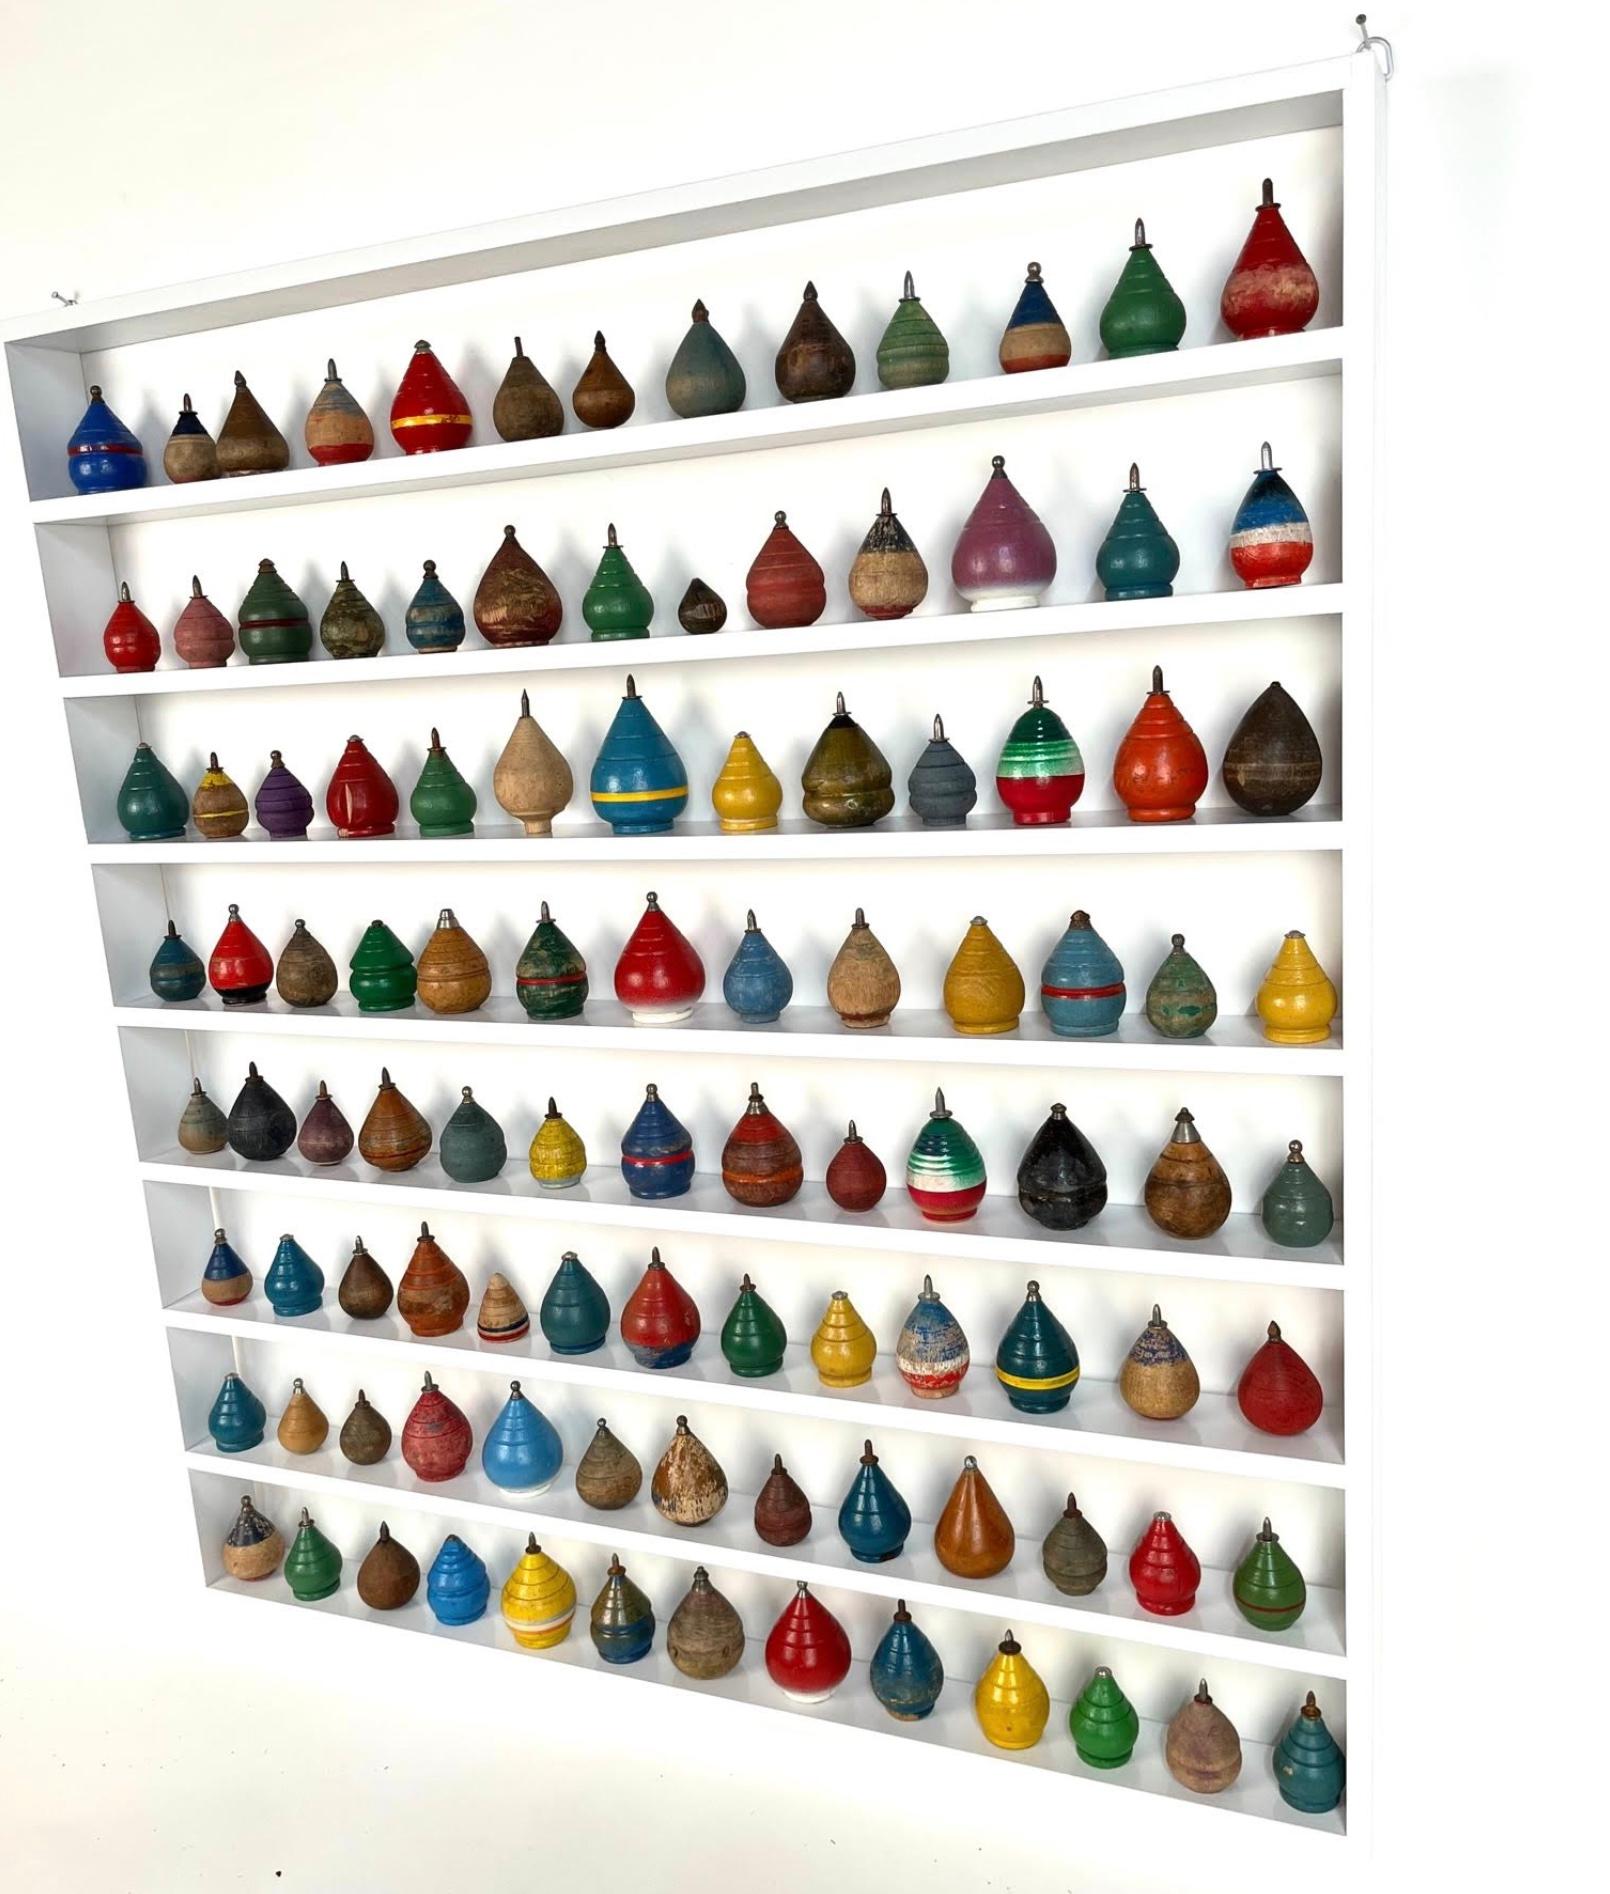 American Craftsman Colorful Collection of 104 Antique Wooden Spinning Top in Custom Display For Sale